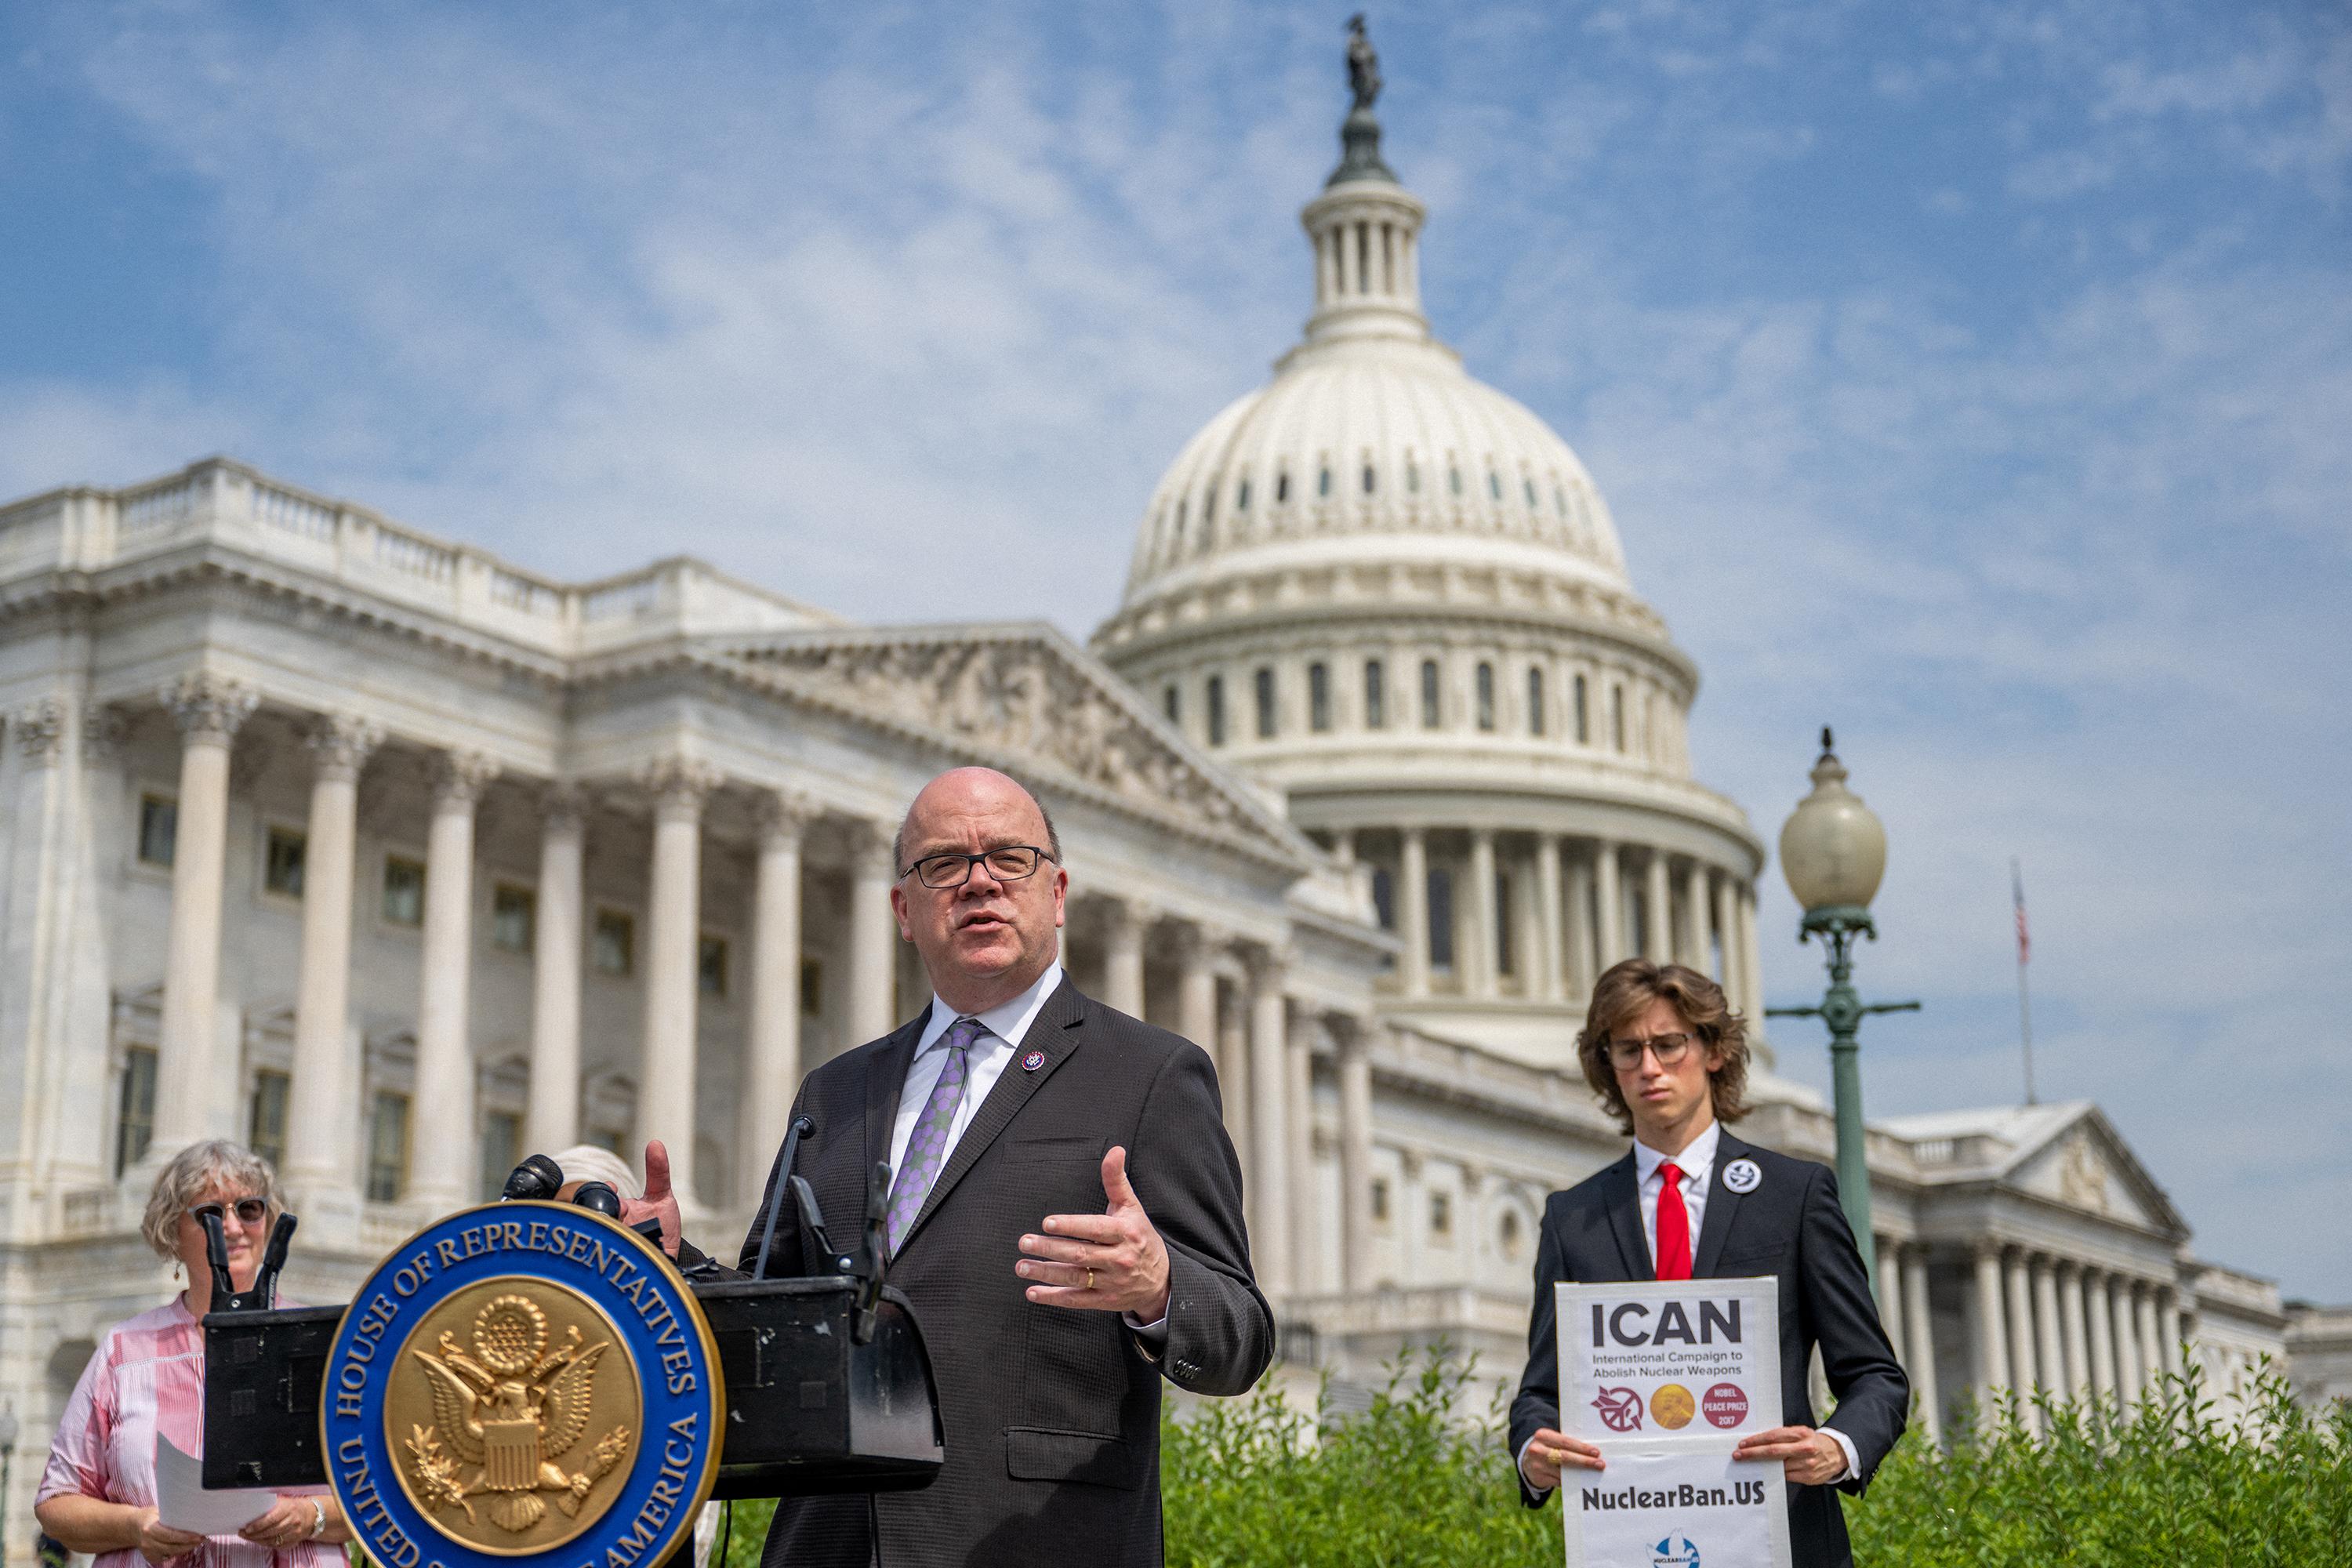 U.S. Representative Jim McGovern gives a press conference on June 22, 2022, in Washington, D.C., to call on the United States to sign a treaty to prohibit nuclear weapons. Photo: Brandon Bell/Getty Images/AFP